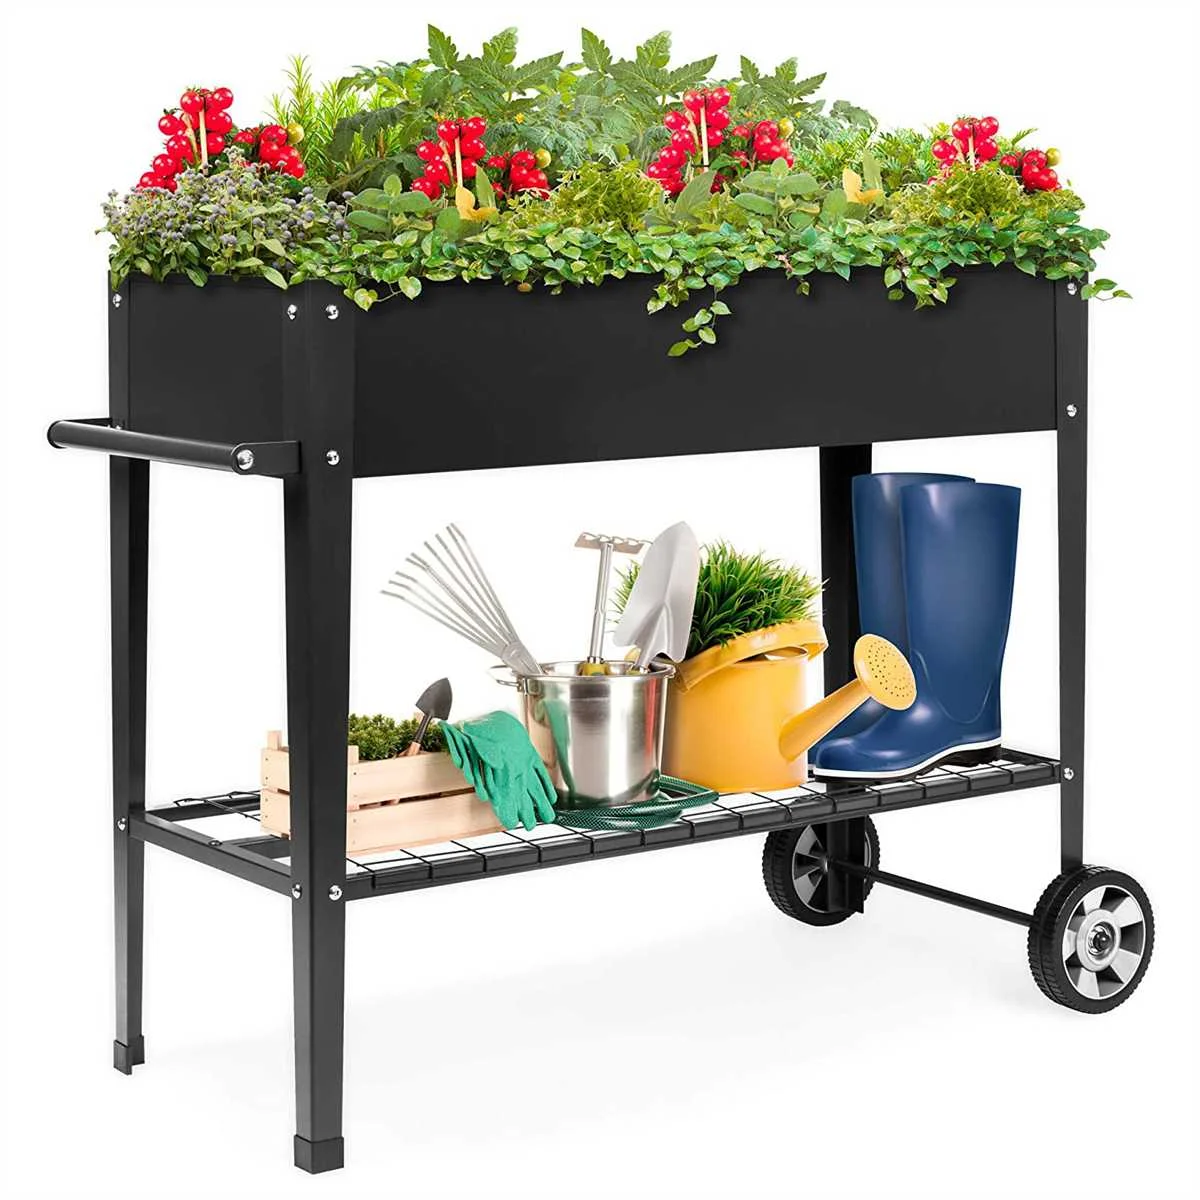 Raised Garden Bed Plant Planter Portable Multifunctional Planter Box Movable Planting Bed with Wheels for Vegetables Flowers